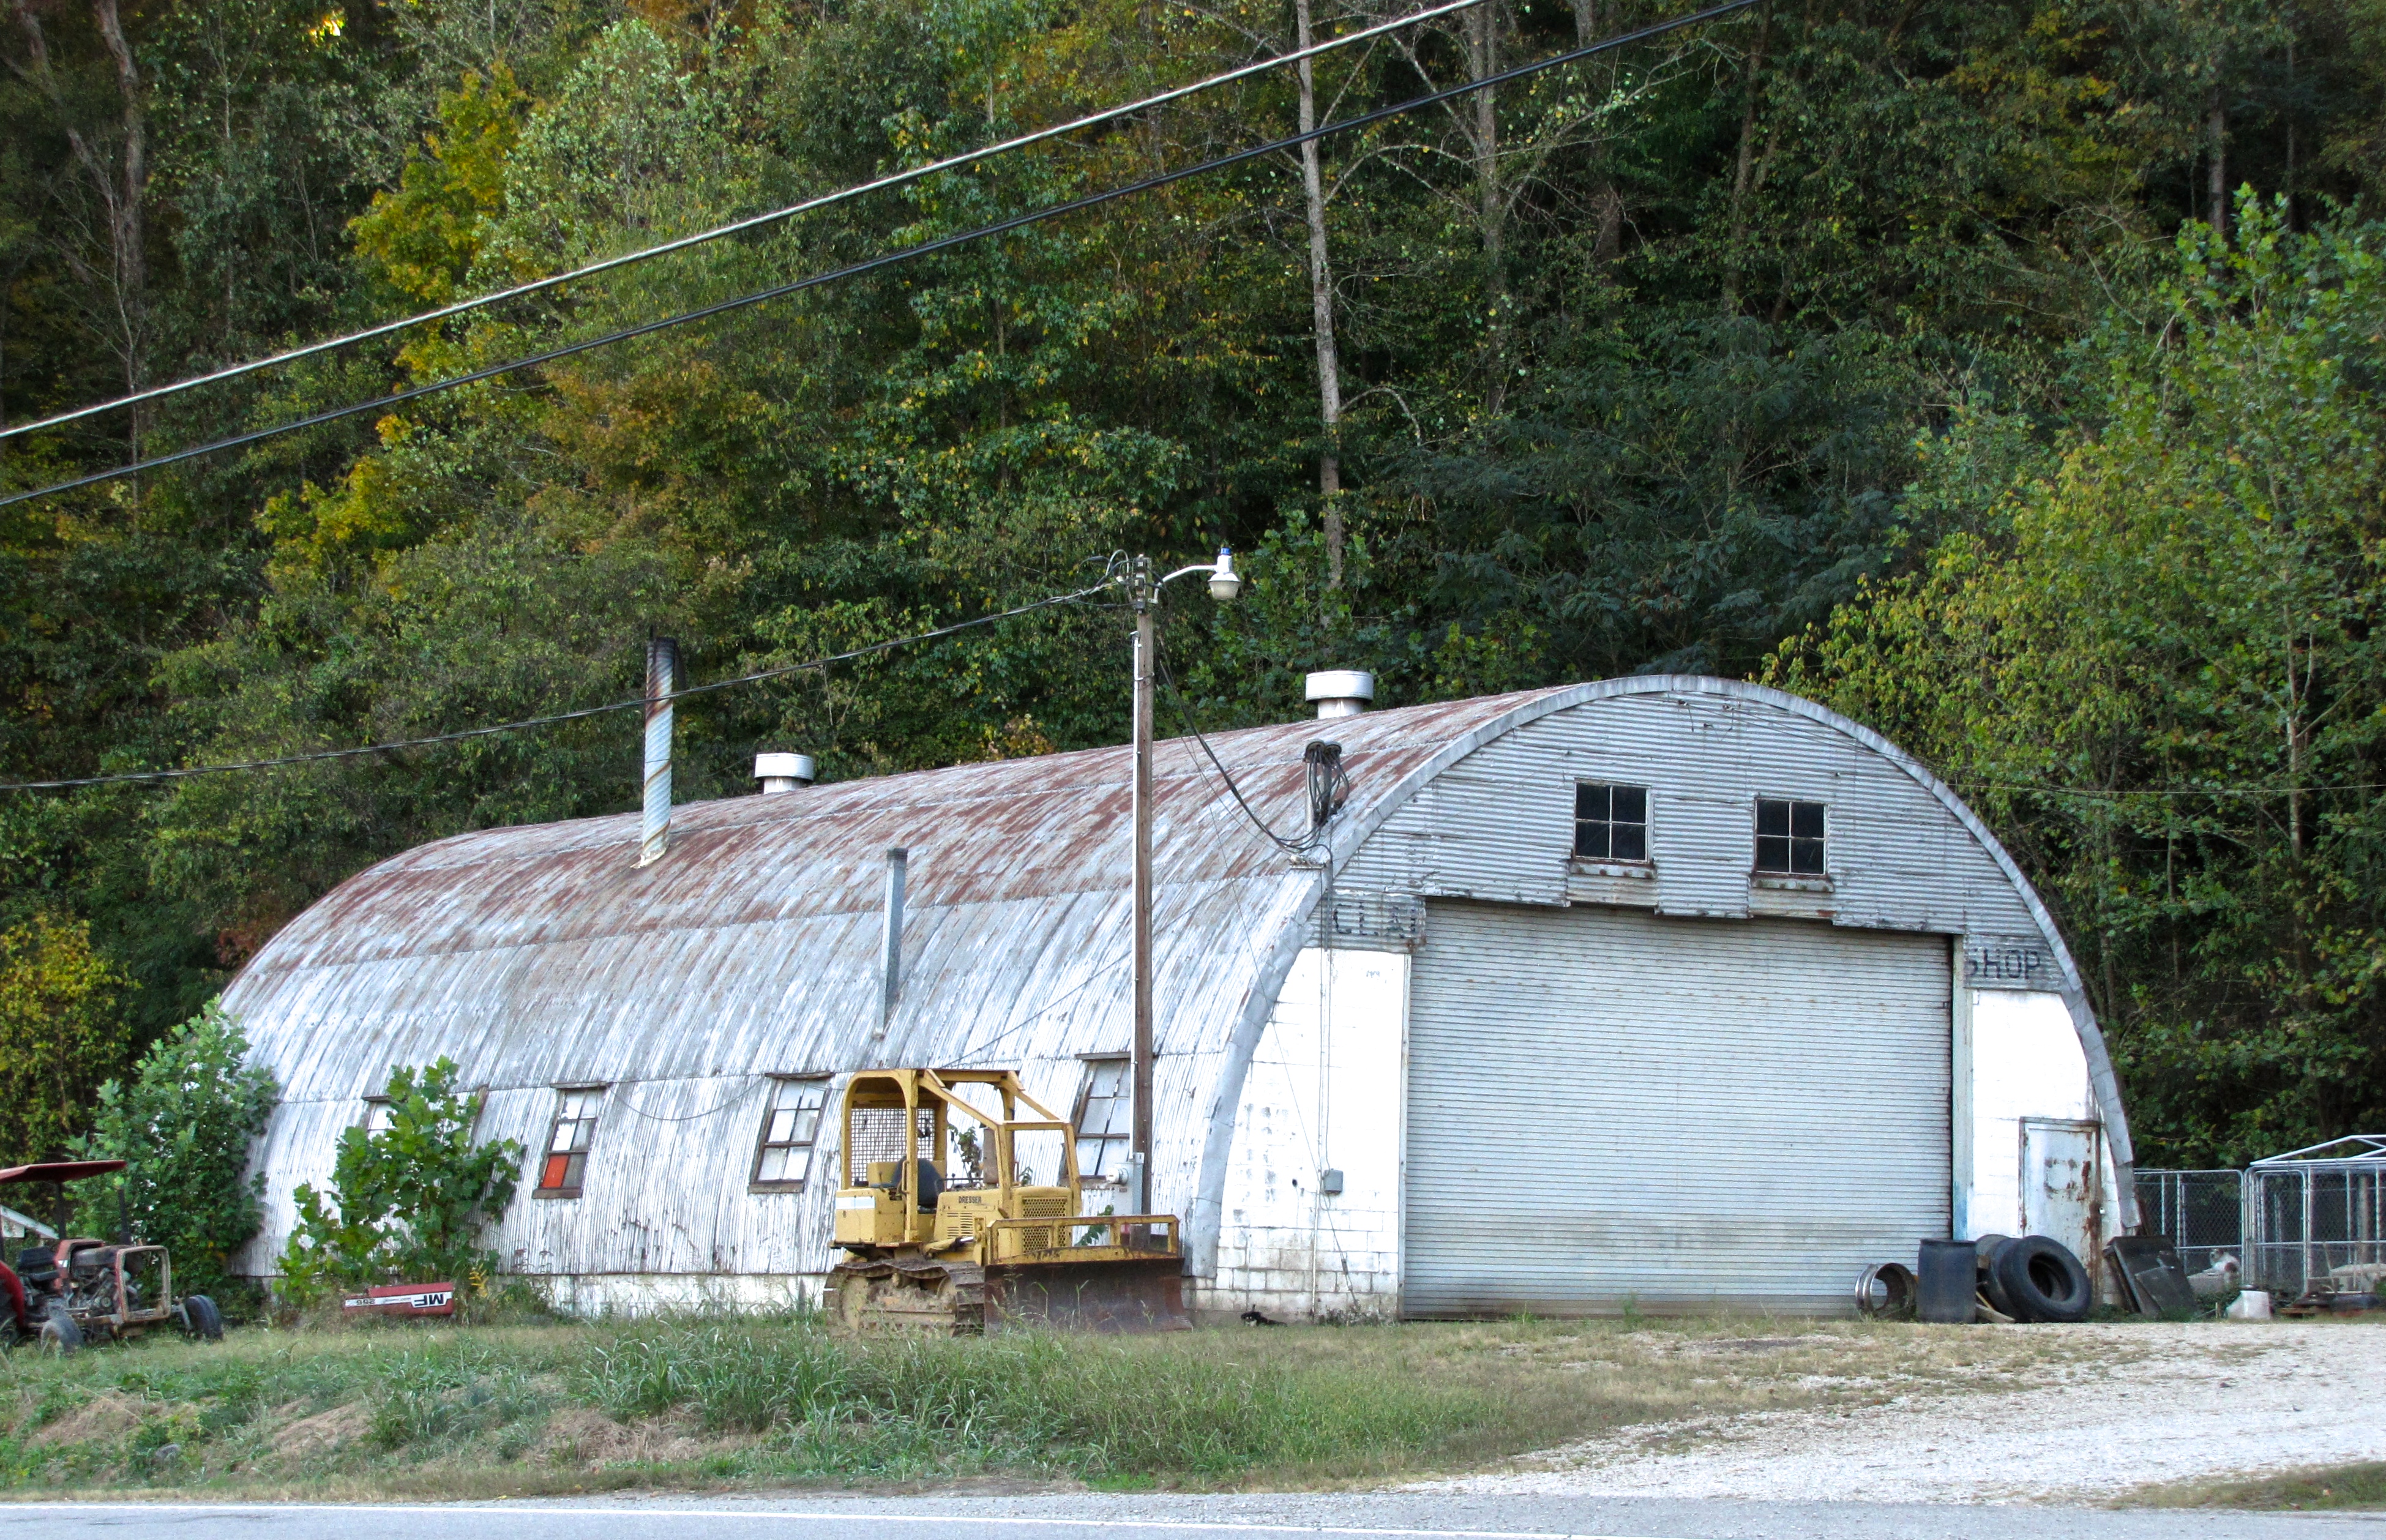 quonset hut in Jaffrey, NH